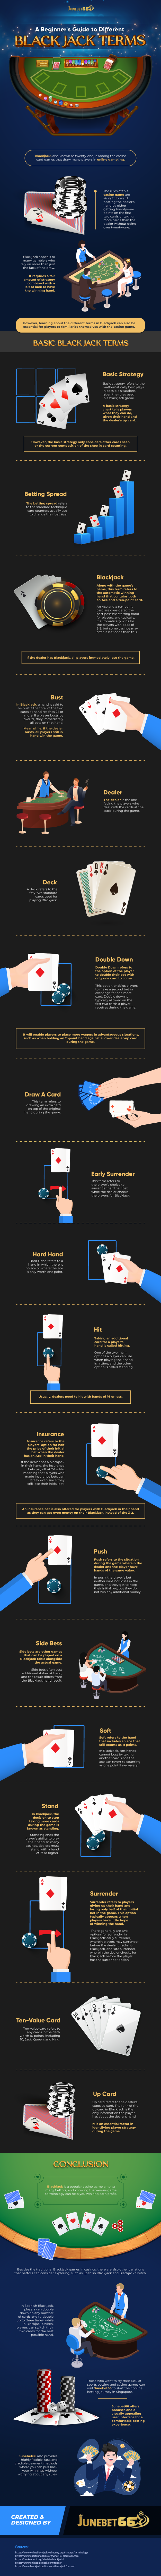 A Beginner’s Guide to Different Blackjack Terms